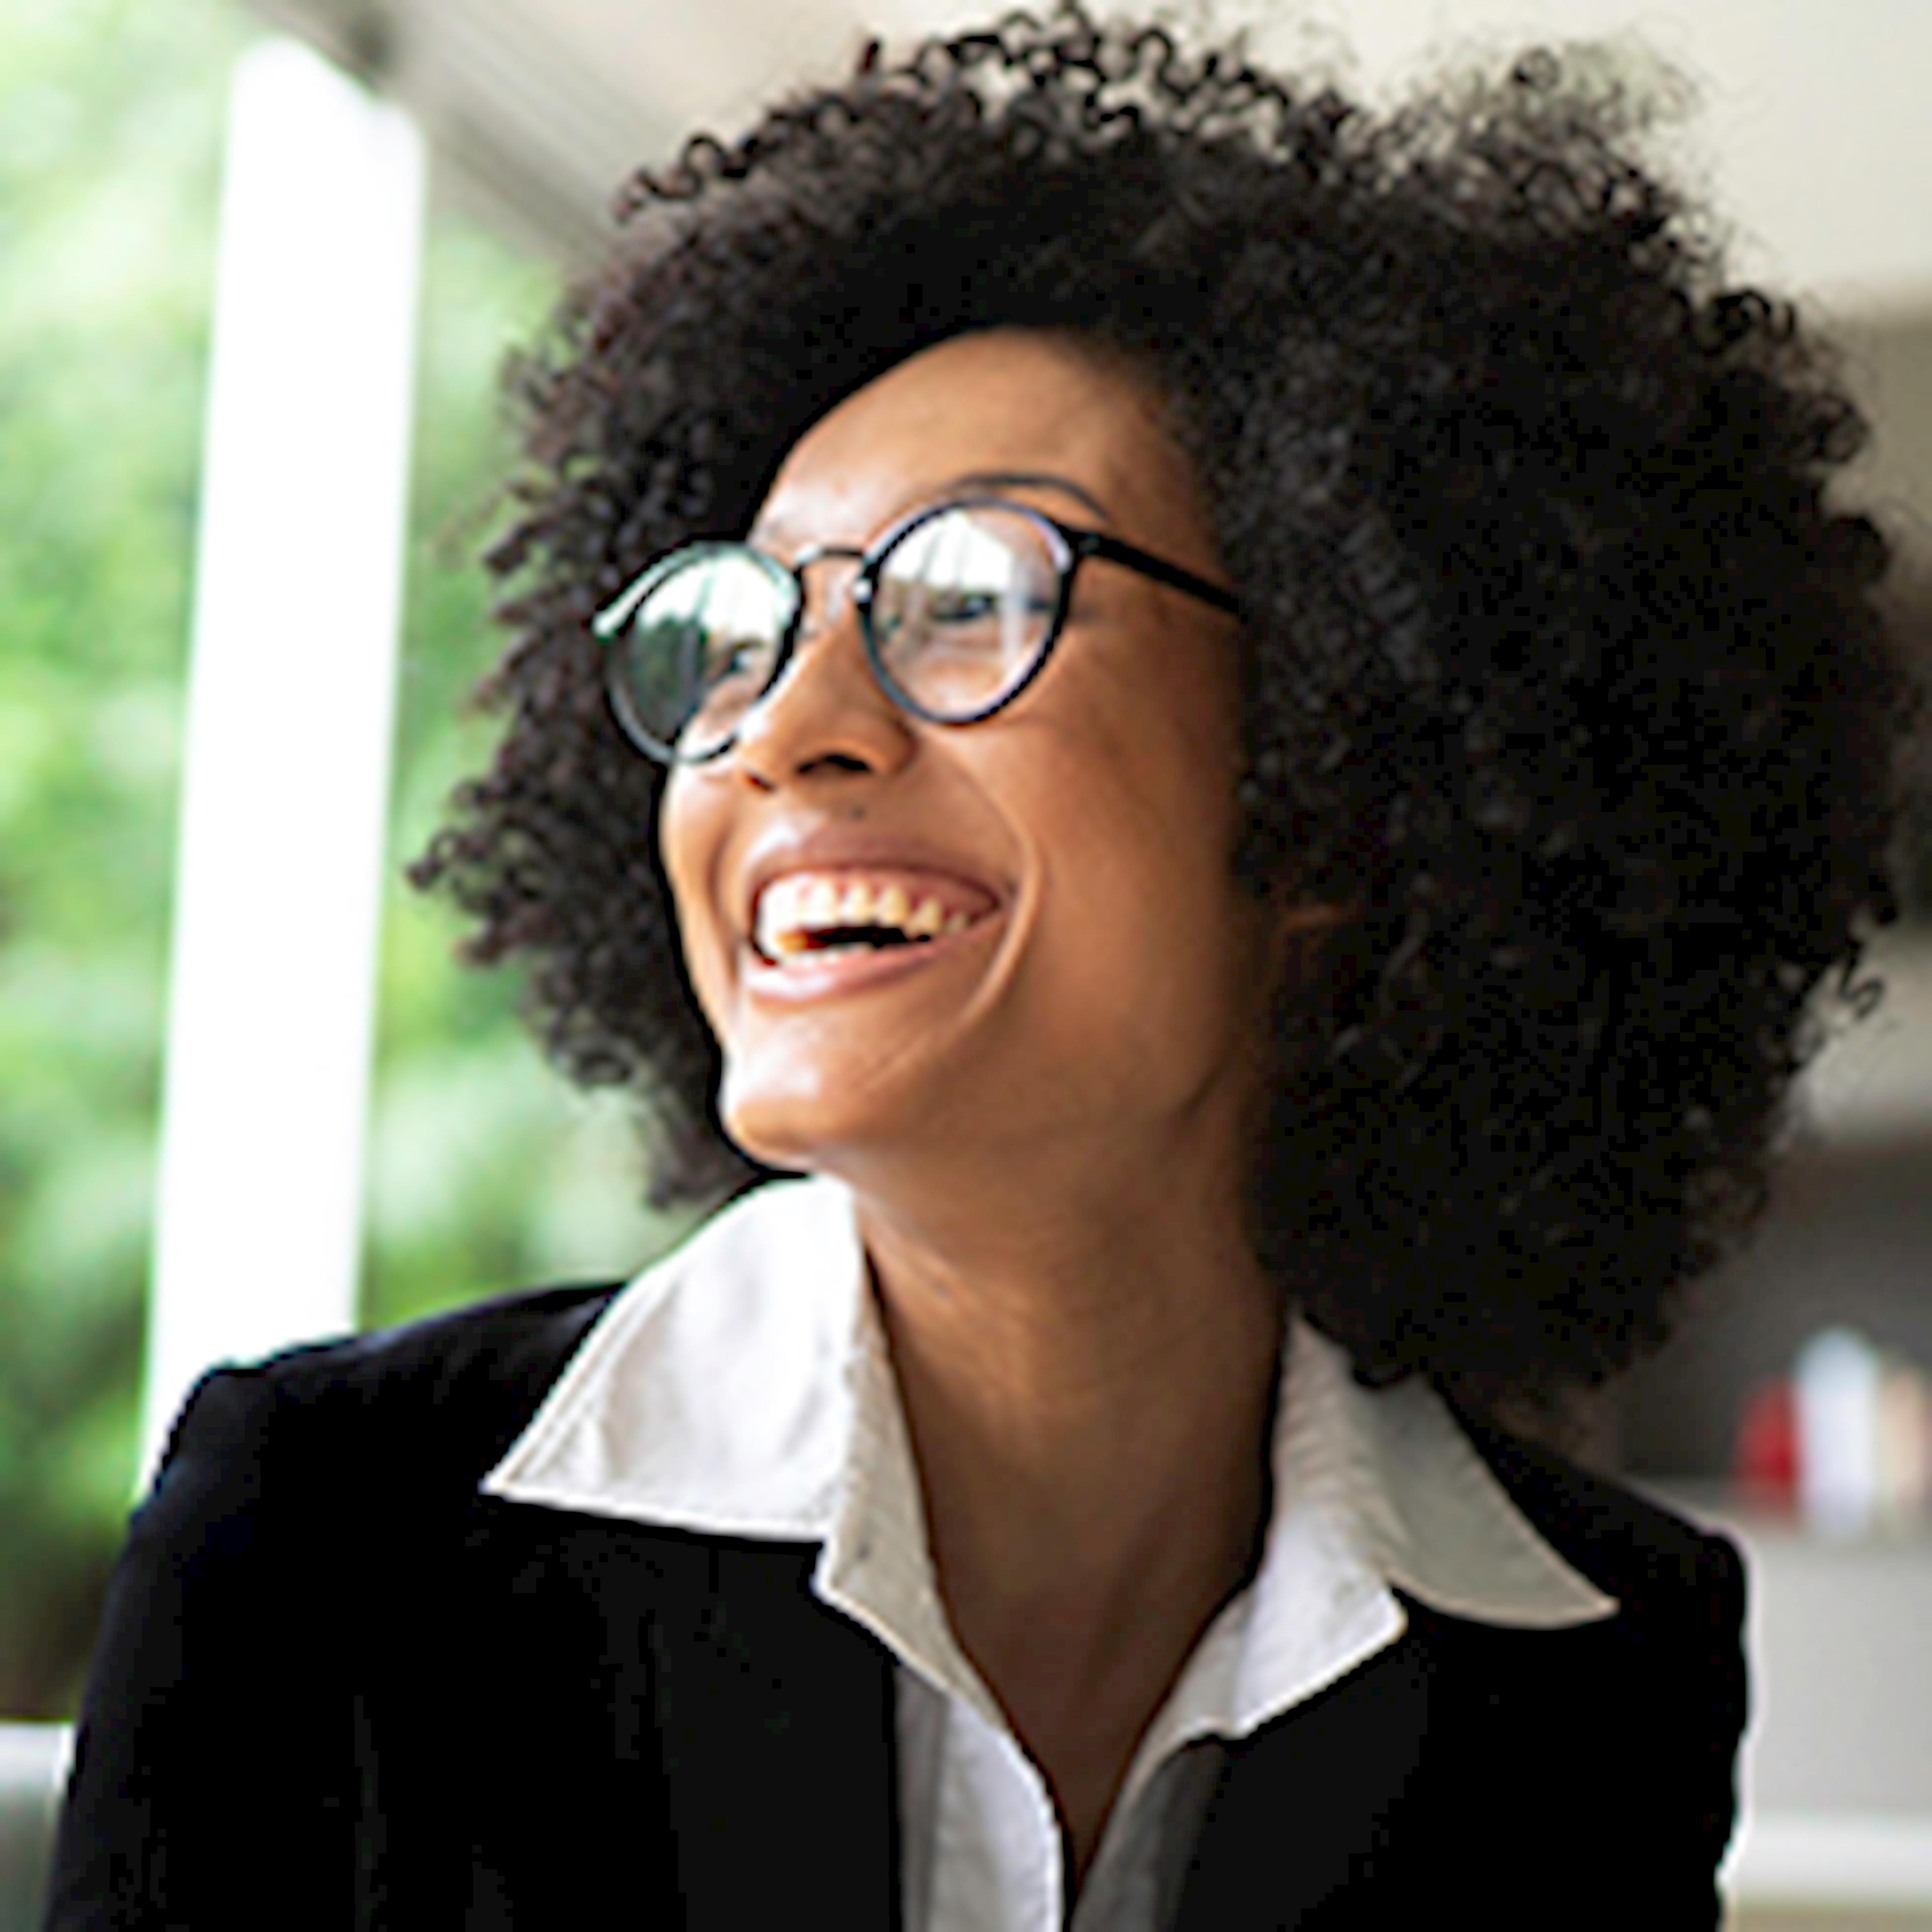 Woman with dark hair, suit and glasses laughing